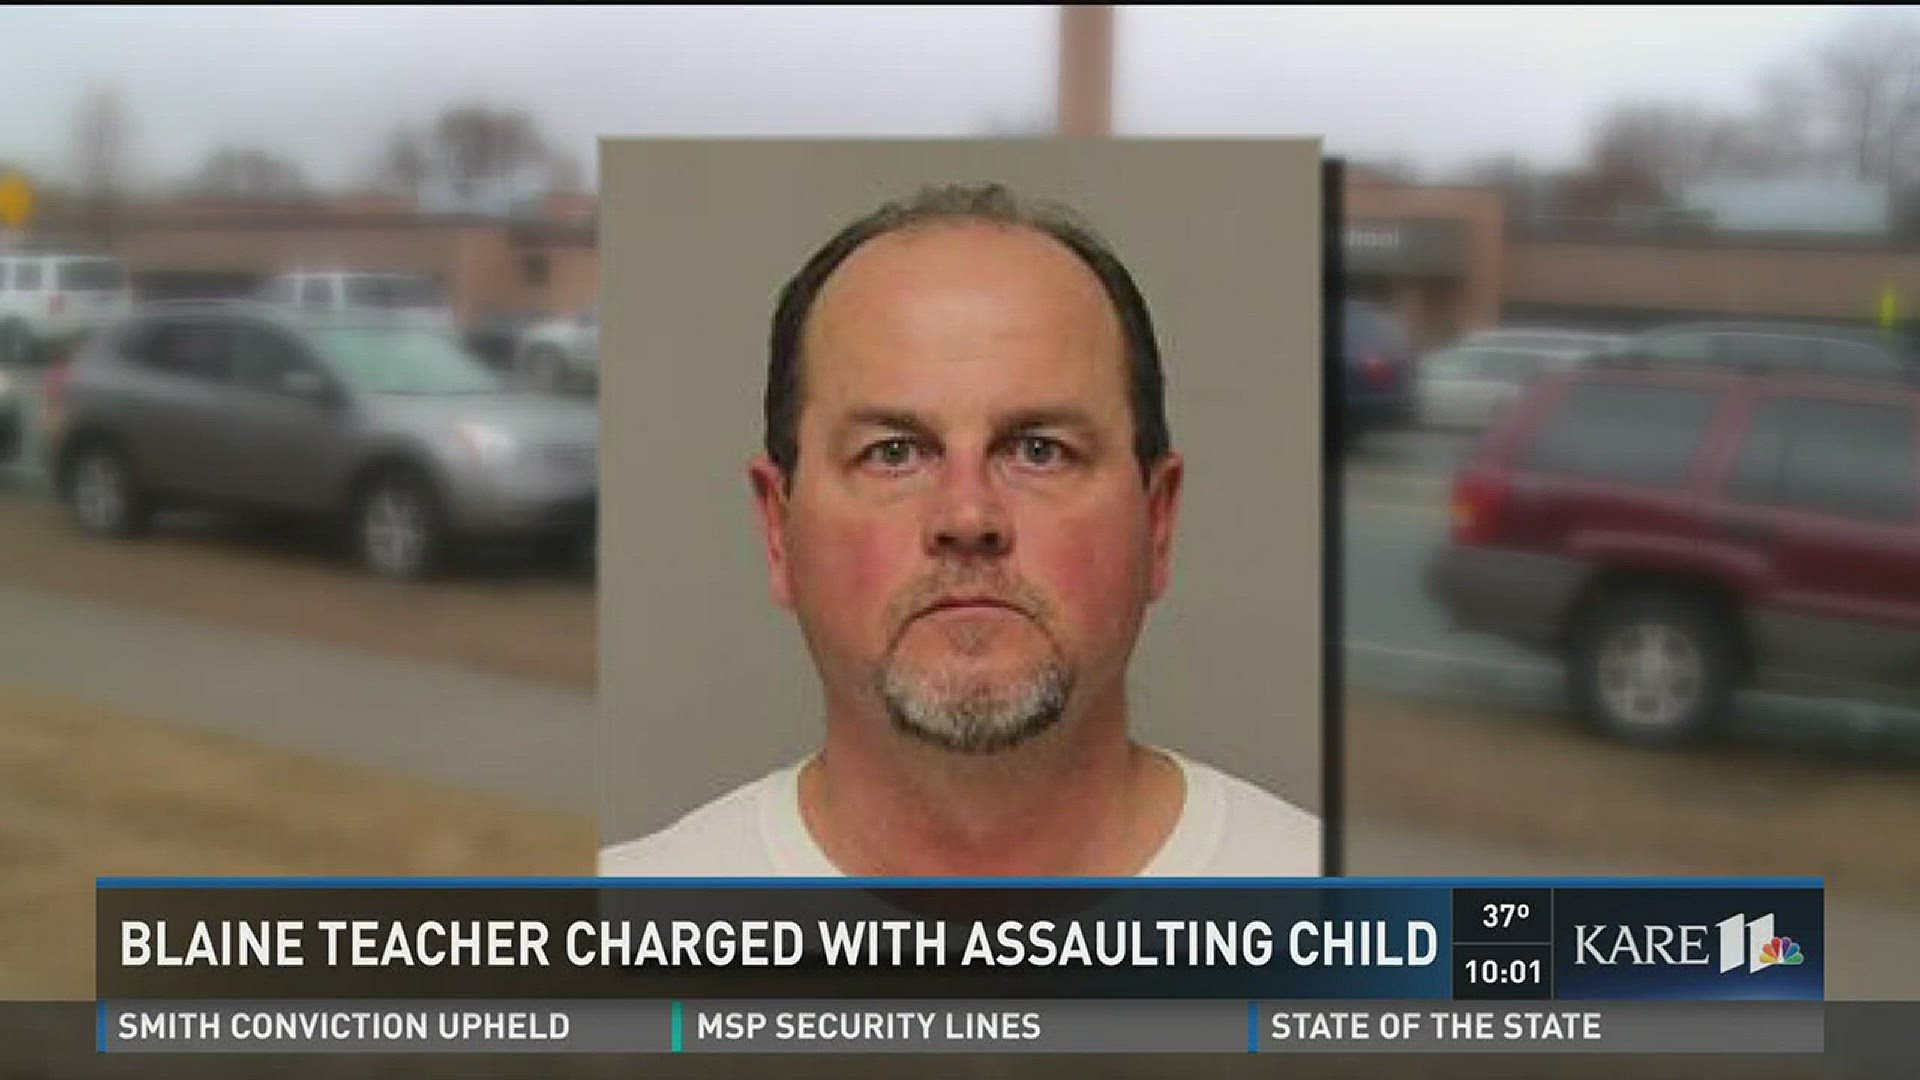 Blaine teacher charged with assaulting child